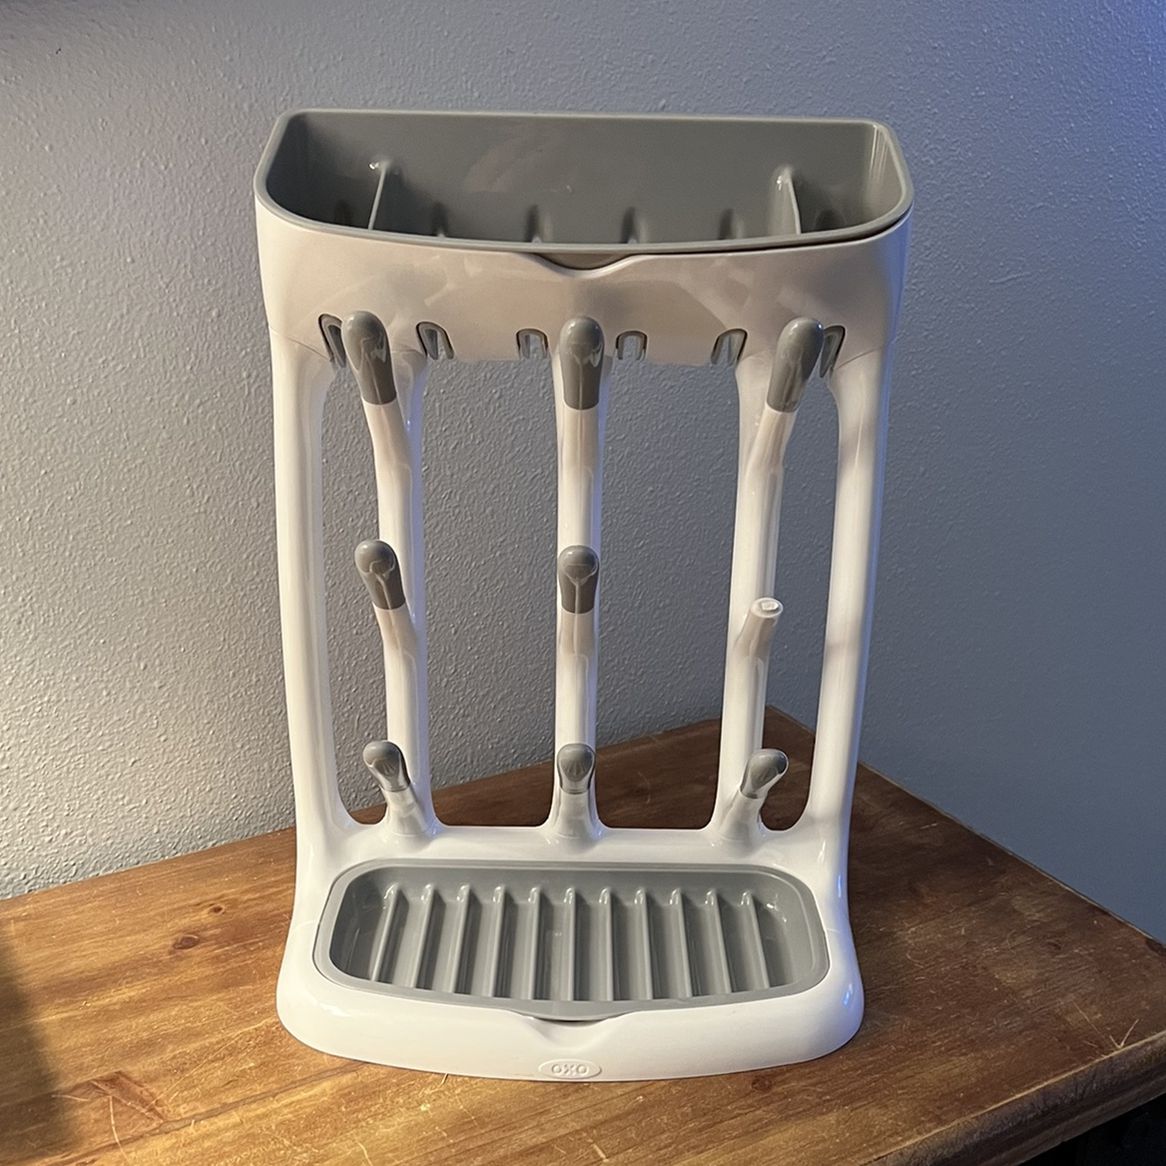 OXO Tot Space Saving Drying Rack for Sale in Bonney Lake, WA - OfferUp